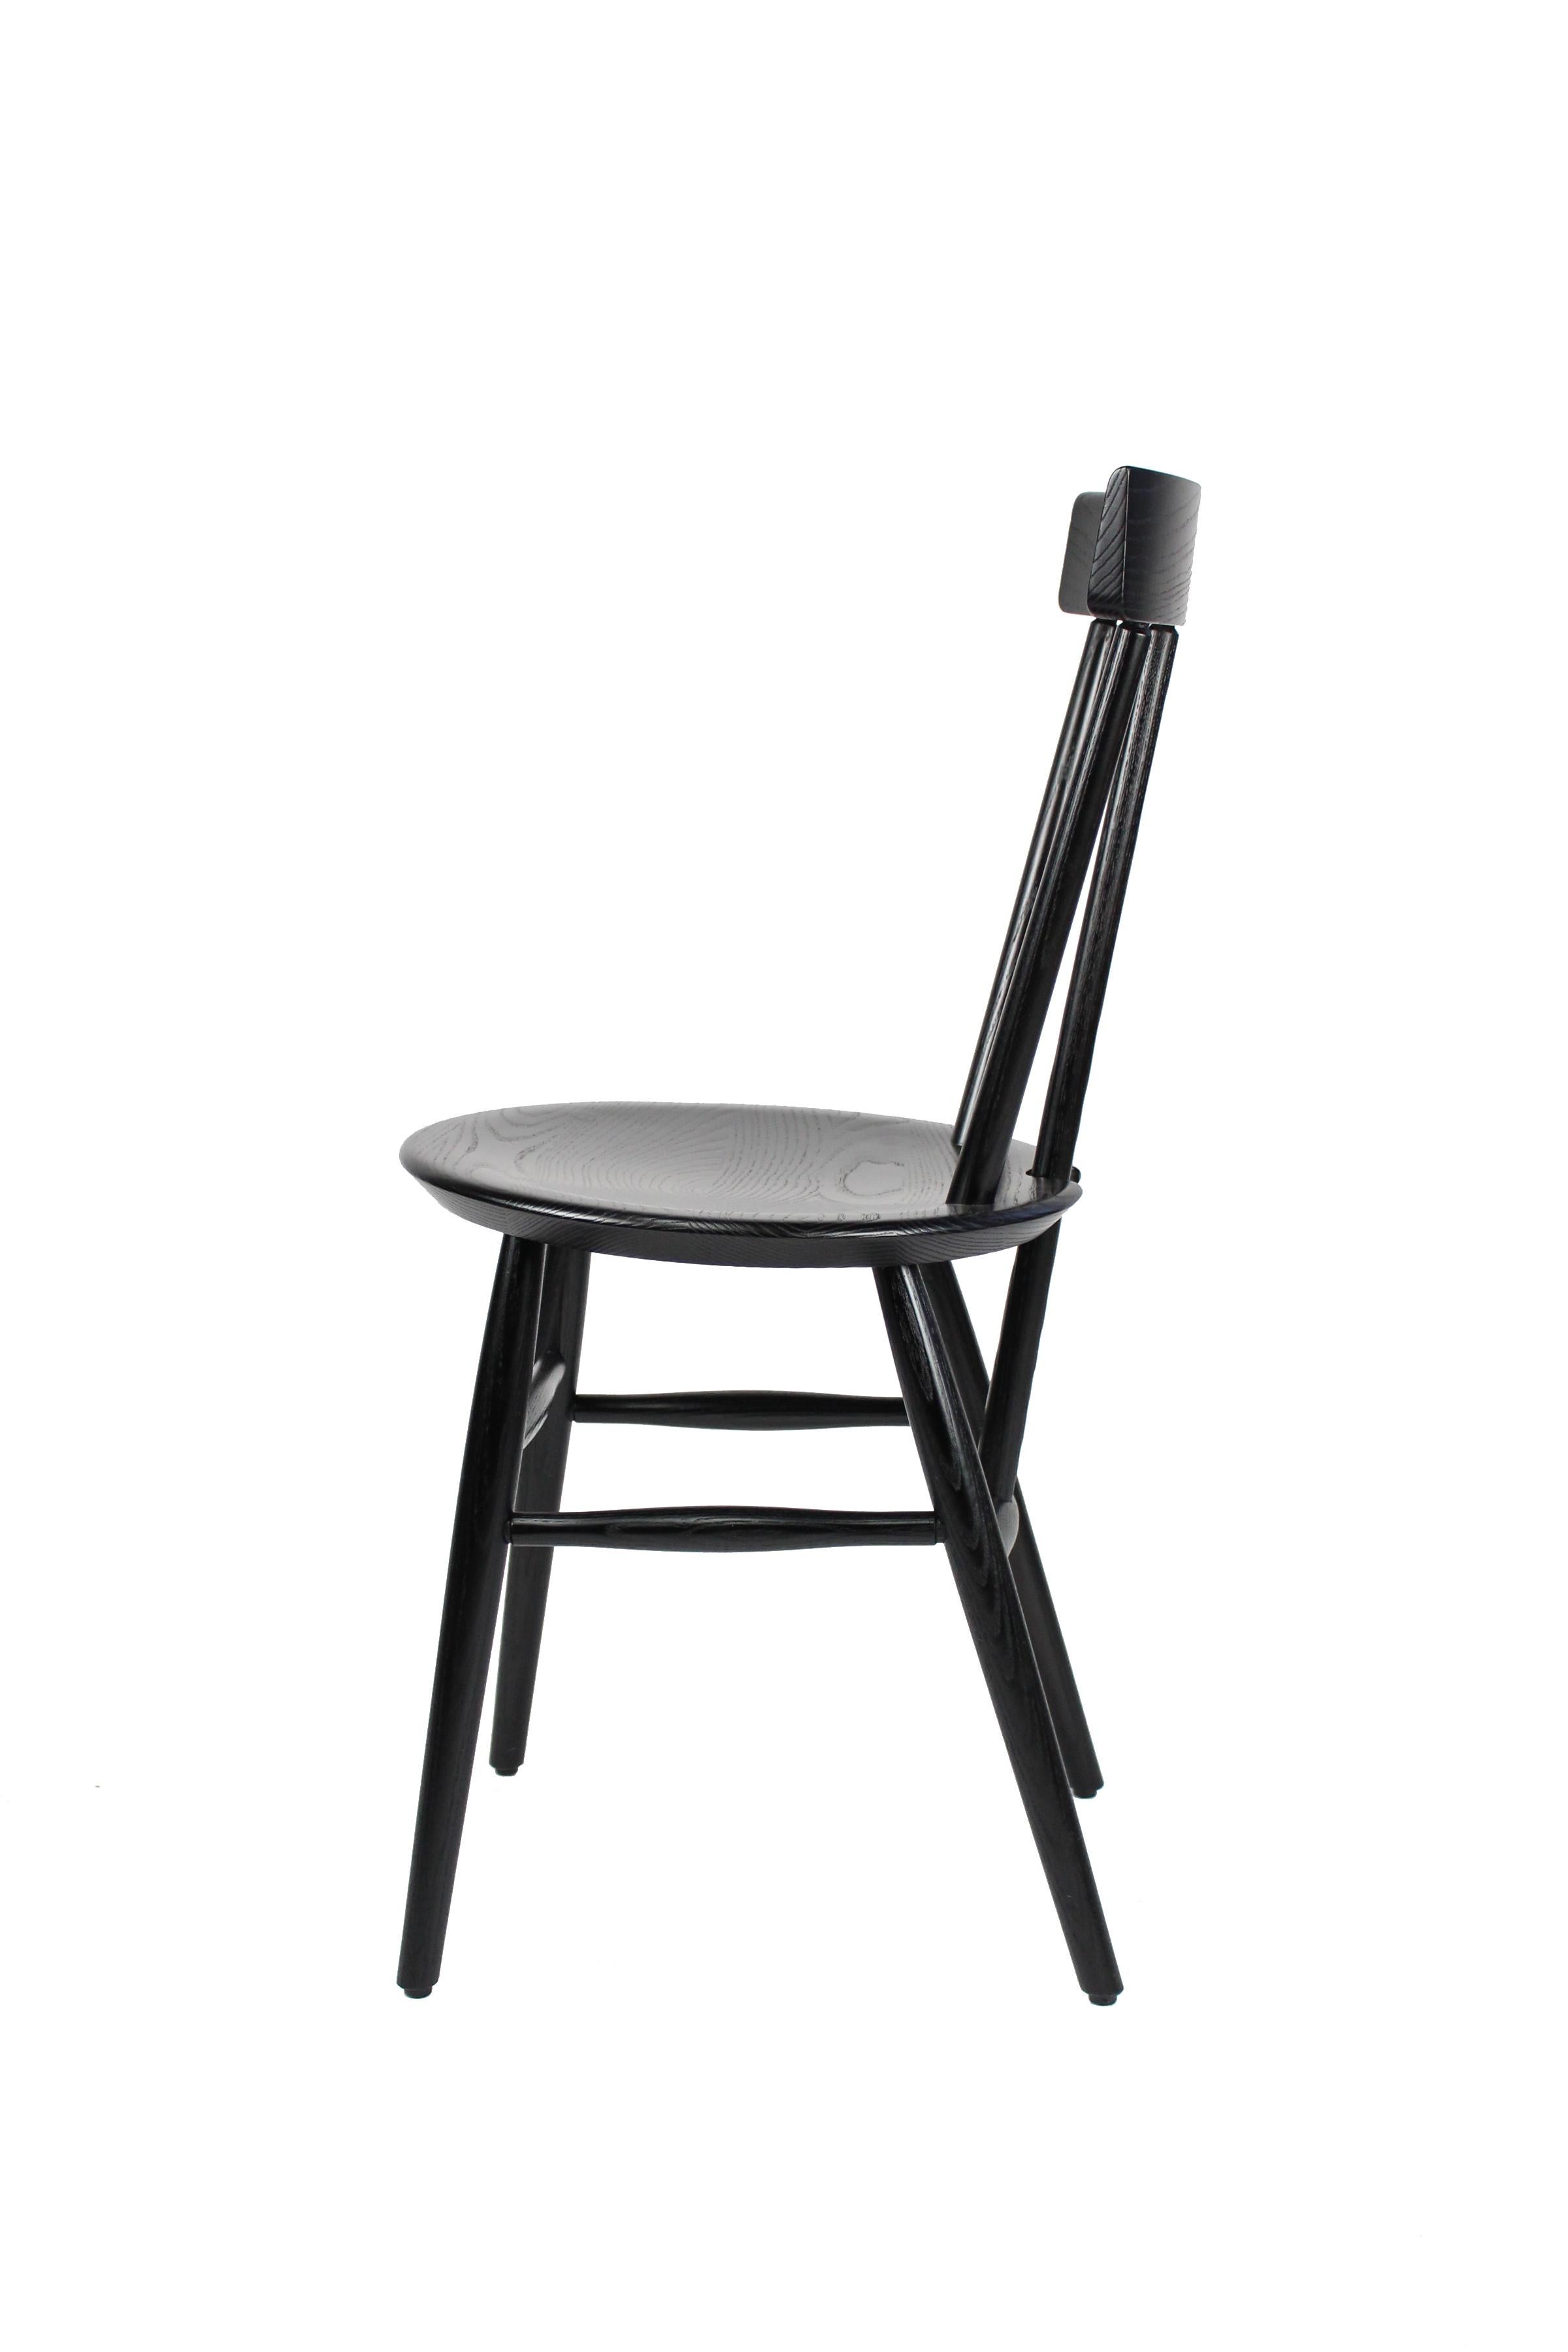 The Sakonnet café chair is a stylish Windsor chair perfect for small spaces and casual dining. Designed by Lothar Windels and developed through a collaboration with O&G, the Sakonnet echoes historic brace-back Windsor chairs with its unique